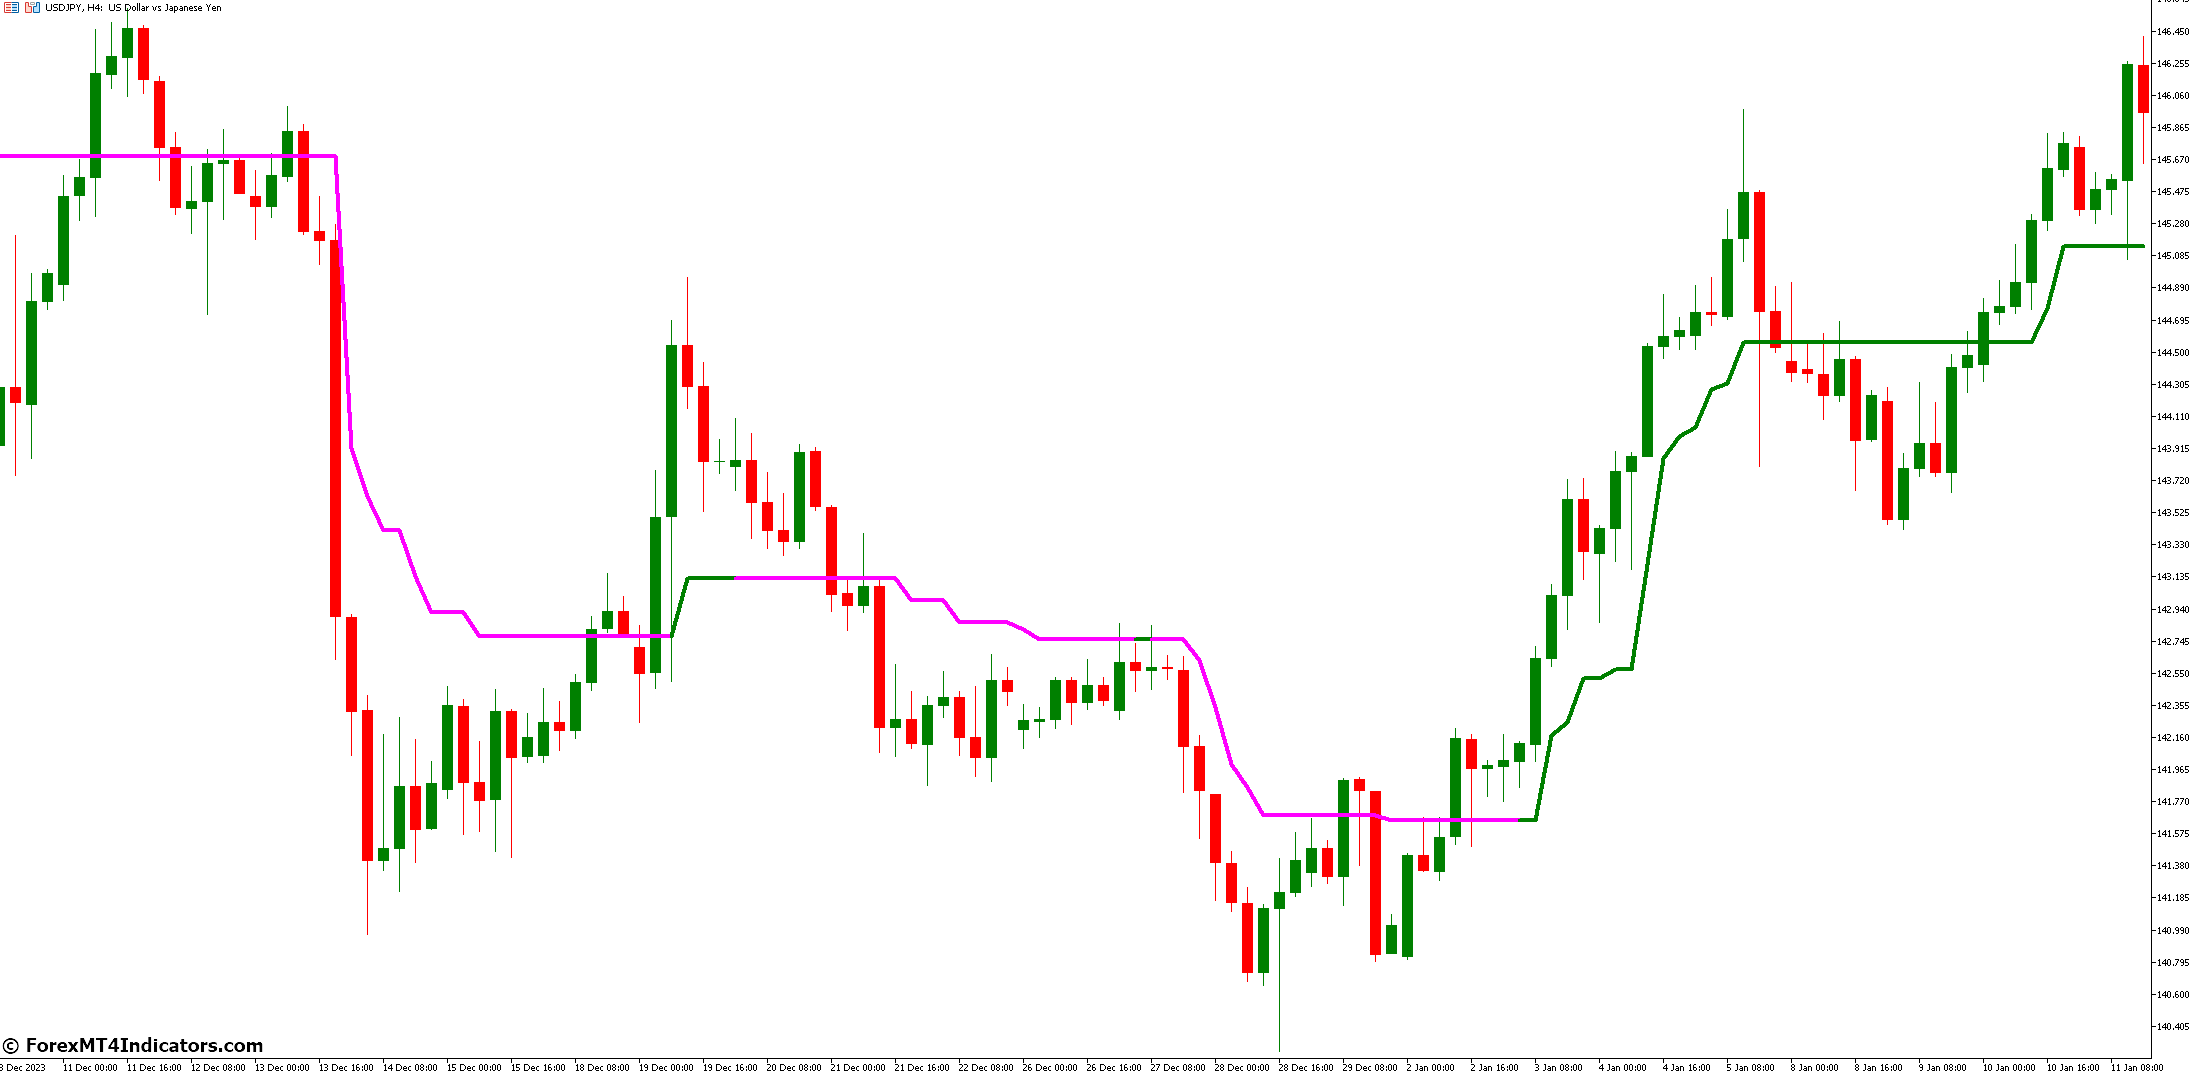 What Are The Benefits Of Using Trend Magic Htf Indicator